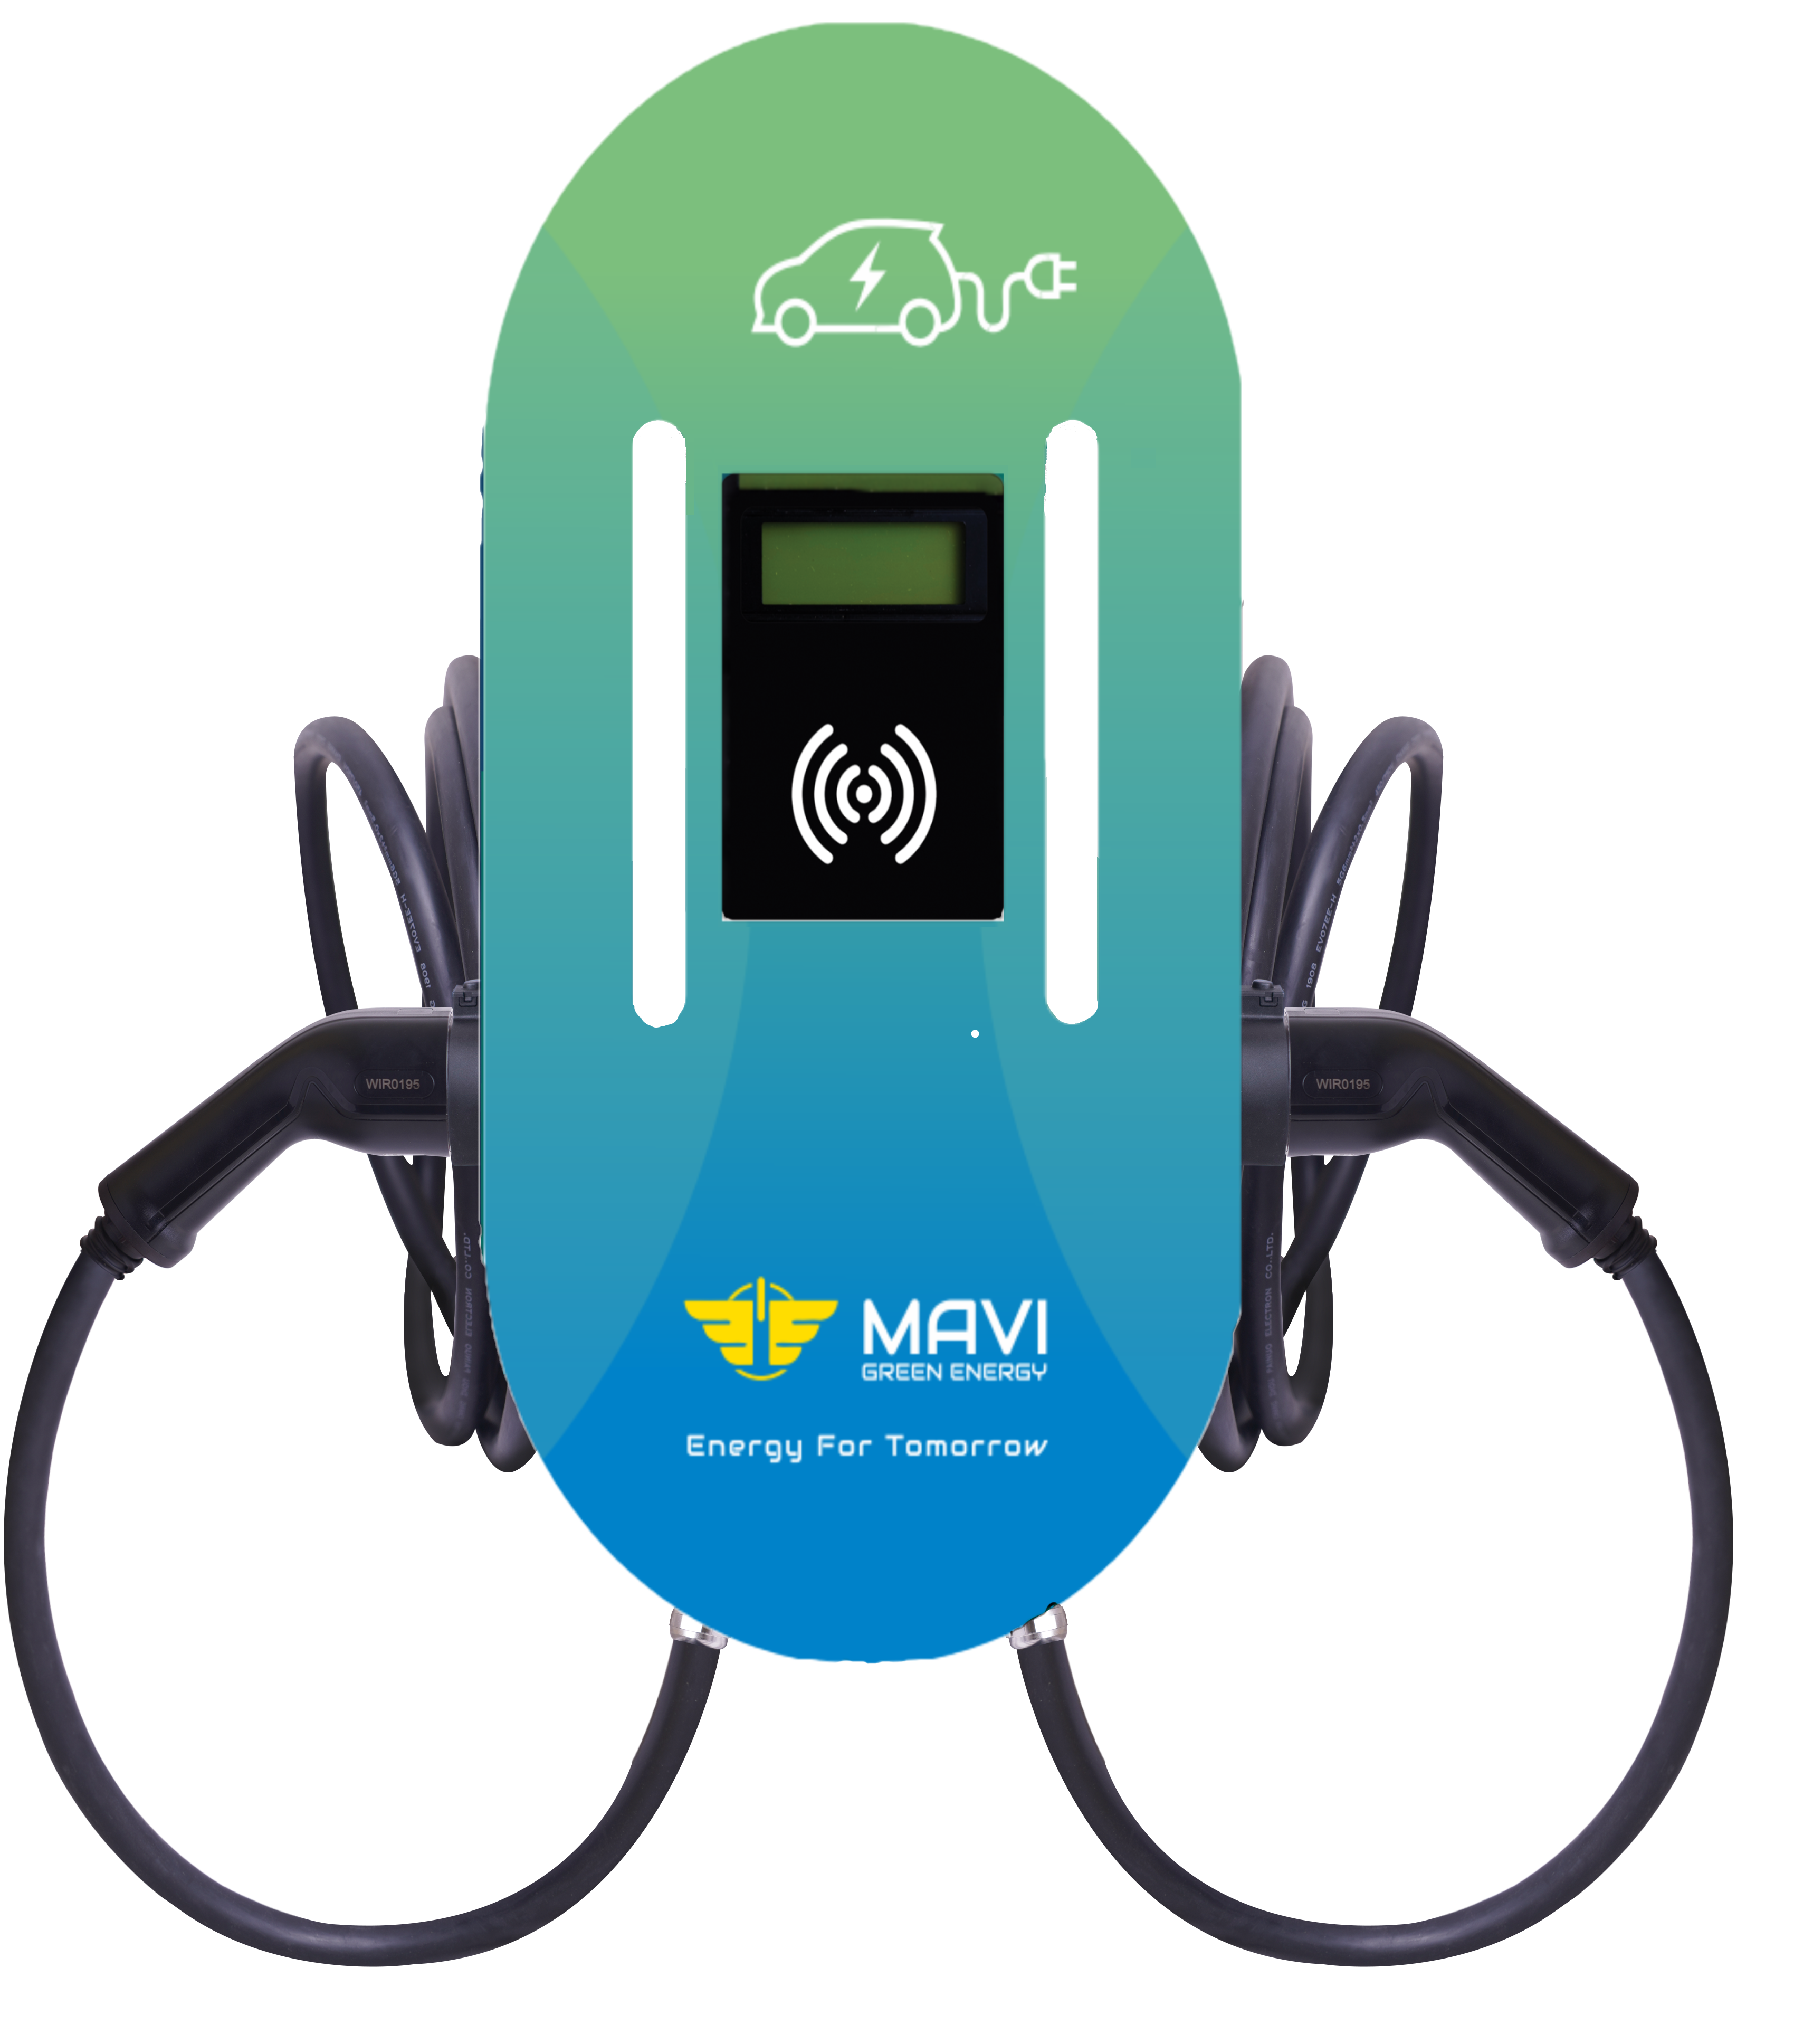 Mavi Green Energy - Electric Vehicle Charging Products and Services